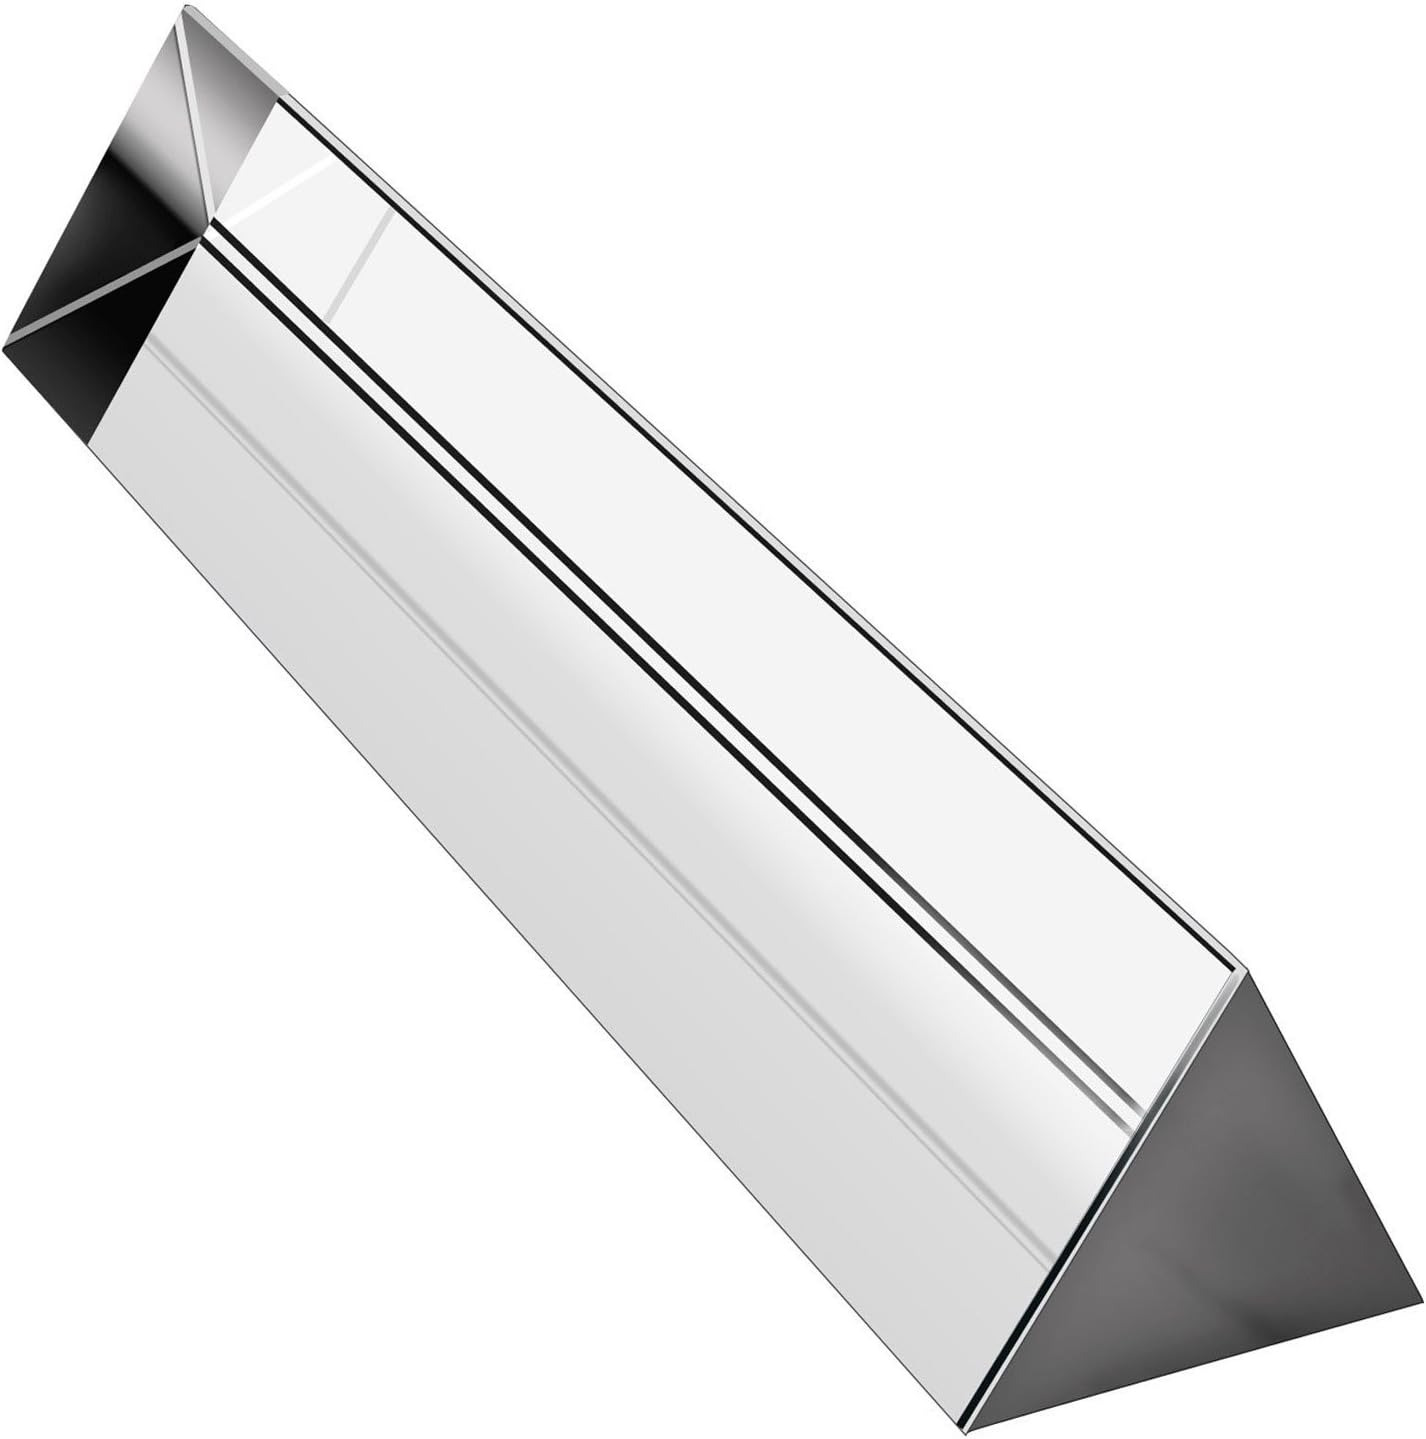 6 Inch Optical Glass Triangular Prism for Teaching Light Spectrum Physics and Ph